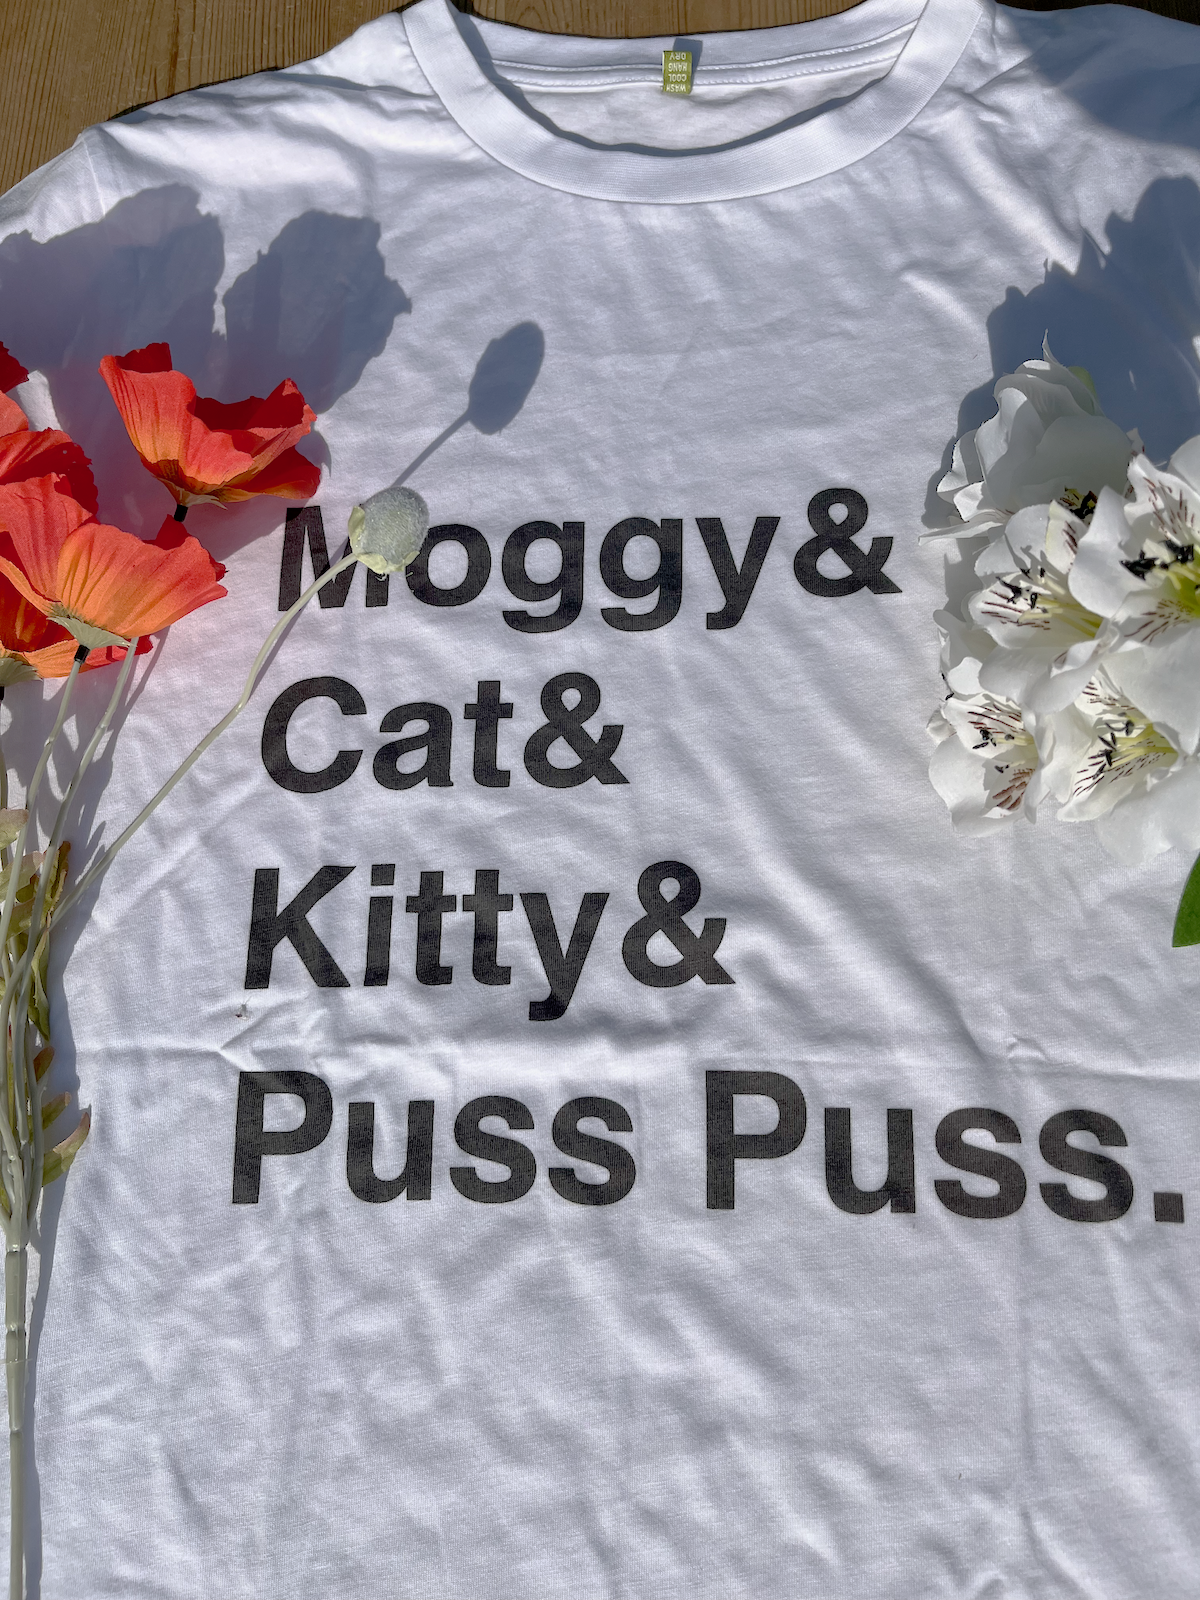 Limited Edition Moggy Organic T-Shirt - white